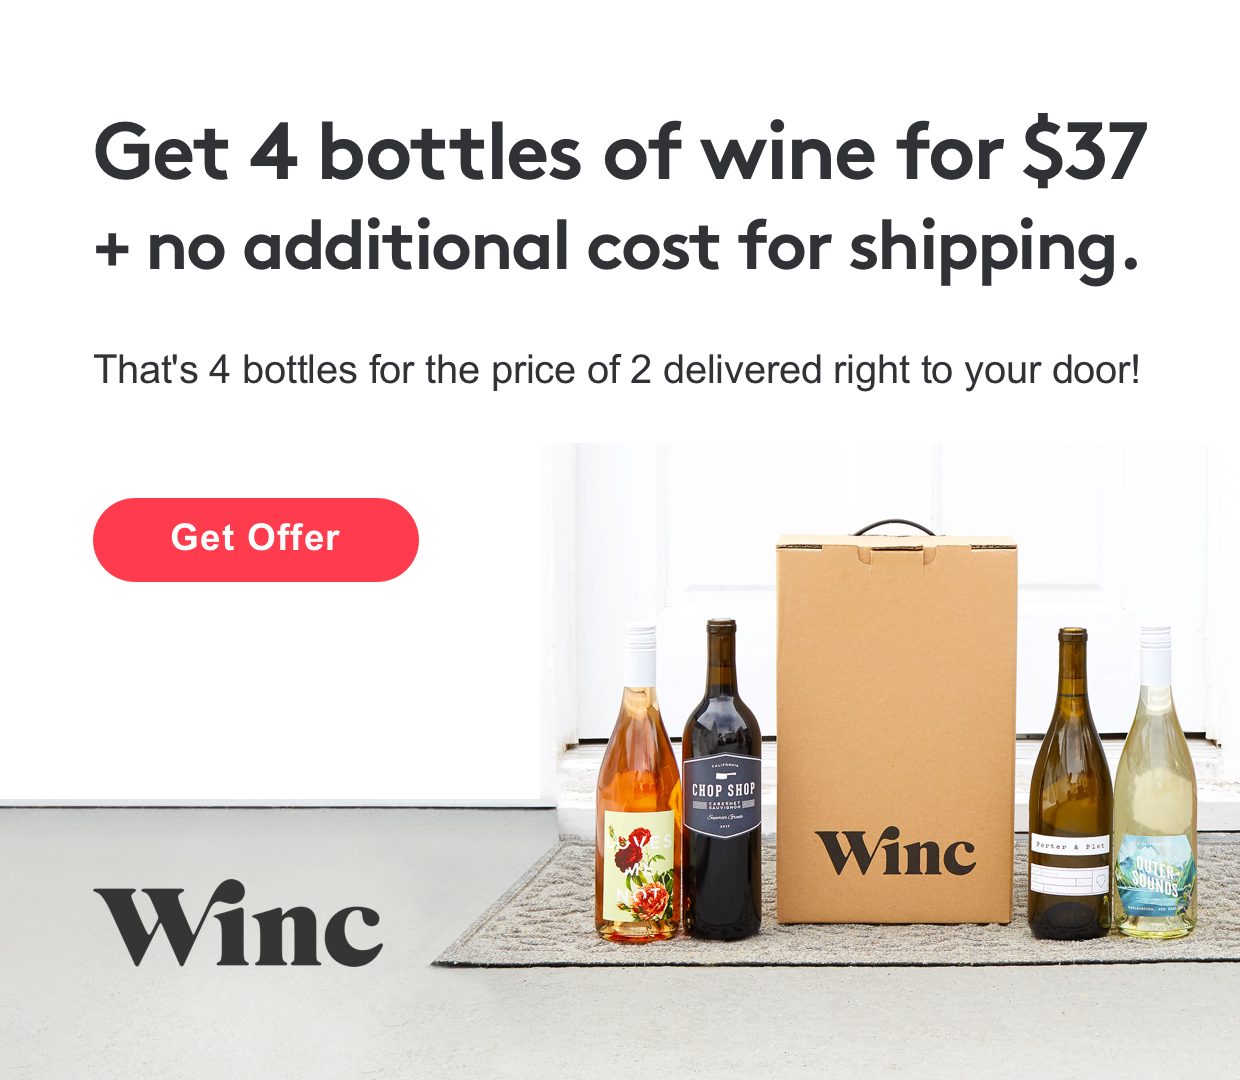 Get 4 bottles of wine for $37 + no additional cost for shipping. Click to recieve this offer!